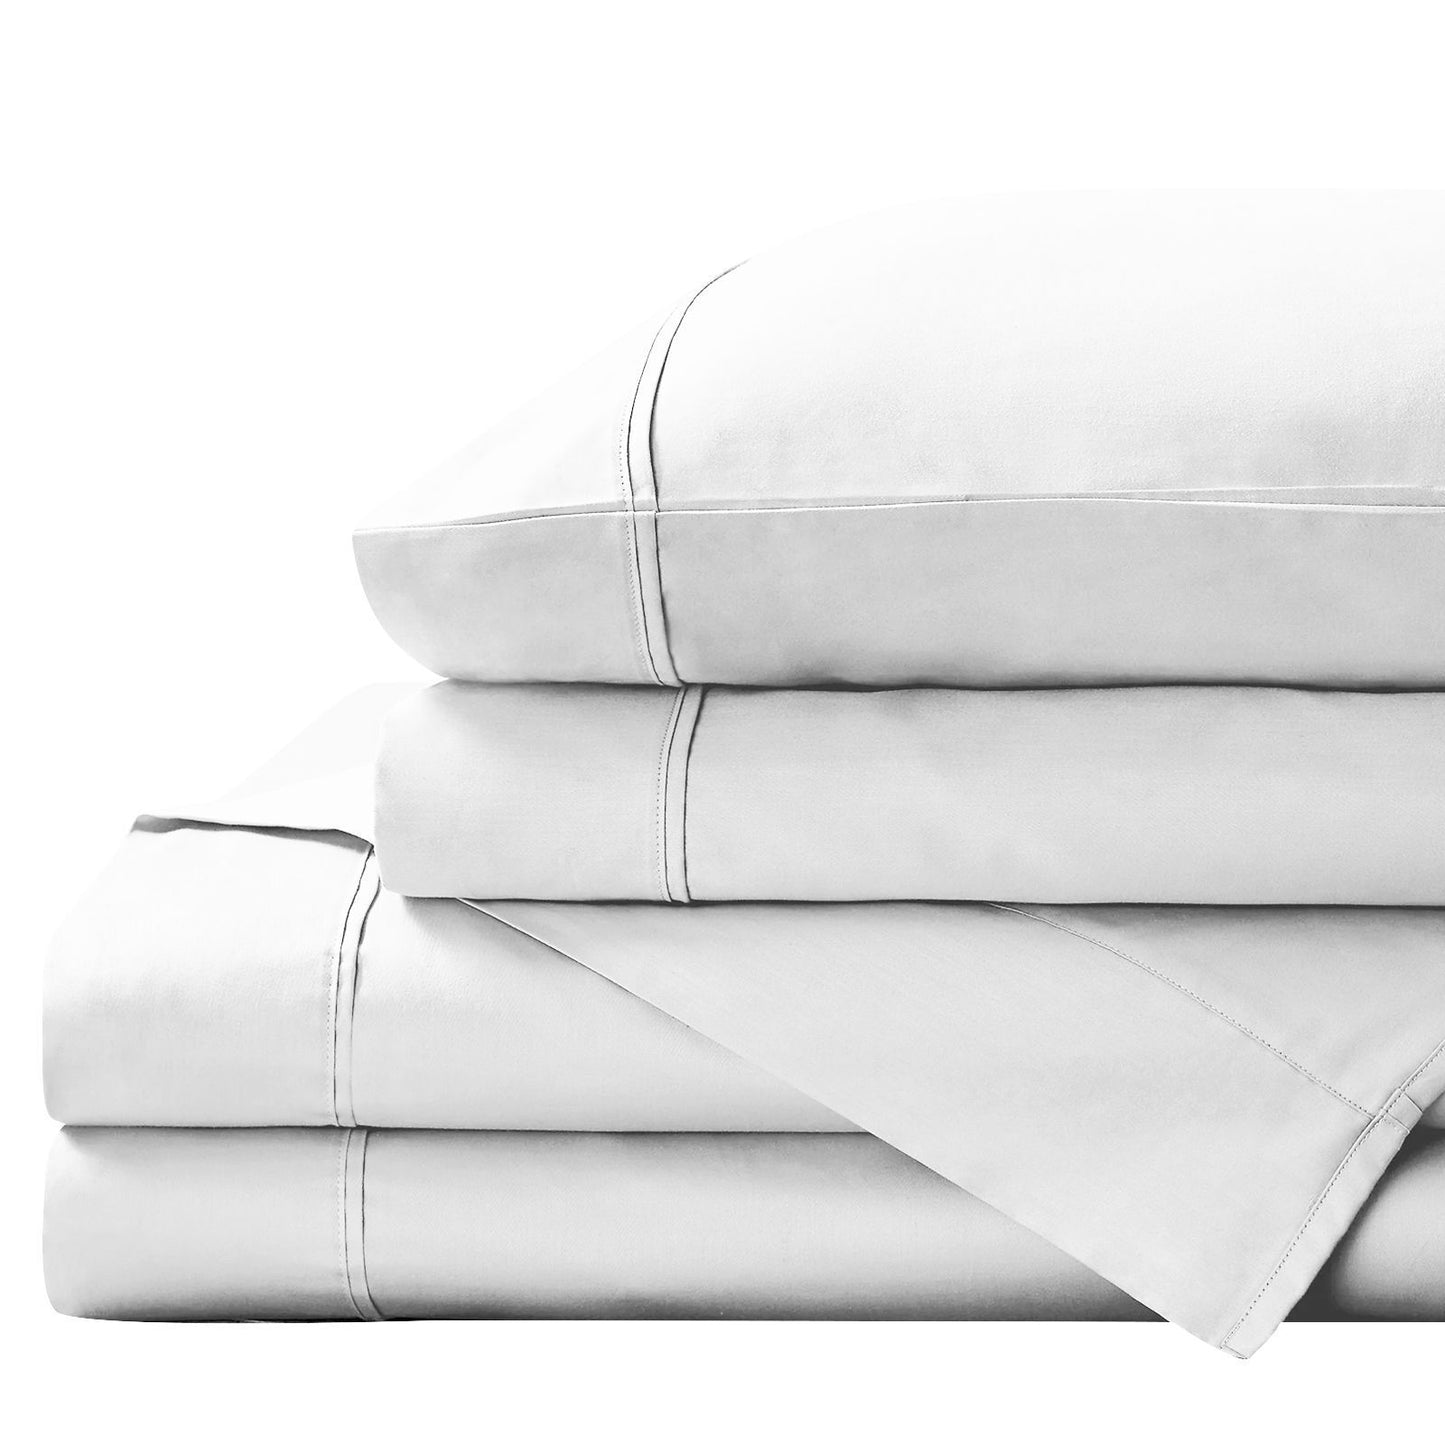 KING 1500TC 4-Piece Cotton Rich Fitted Sheet Sets - White